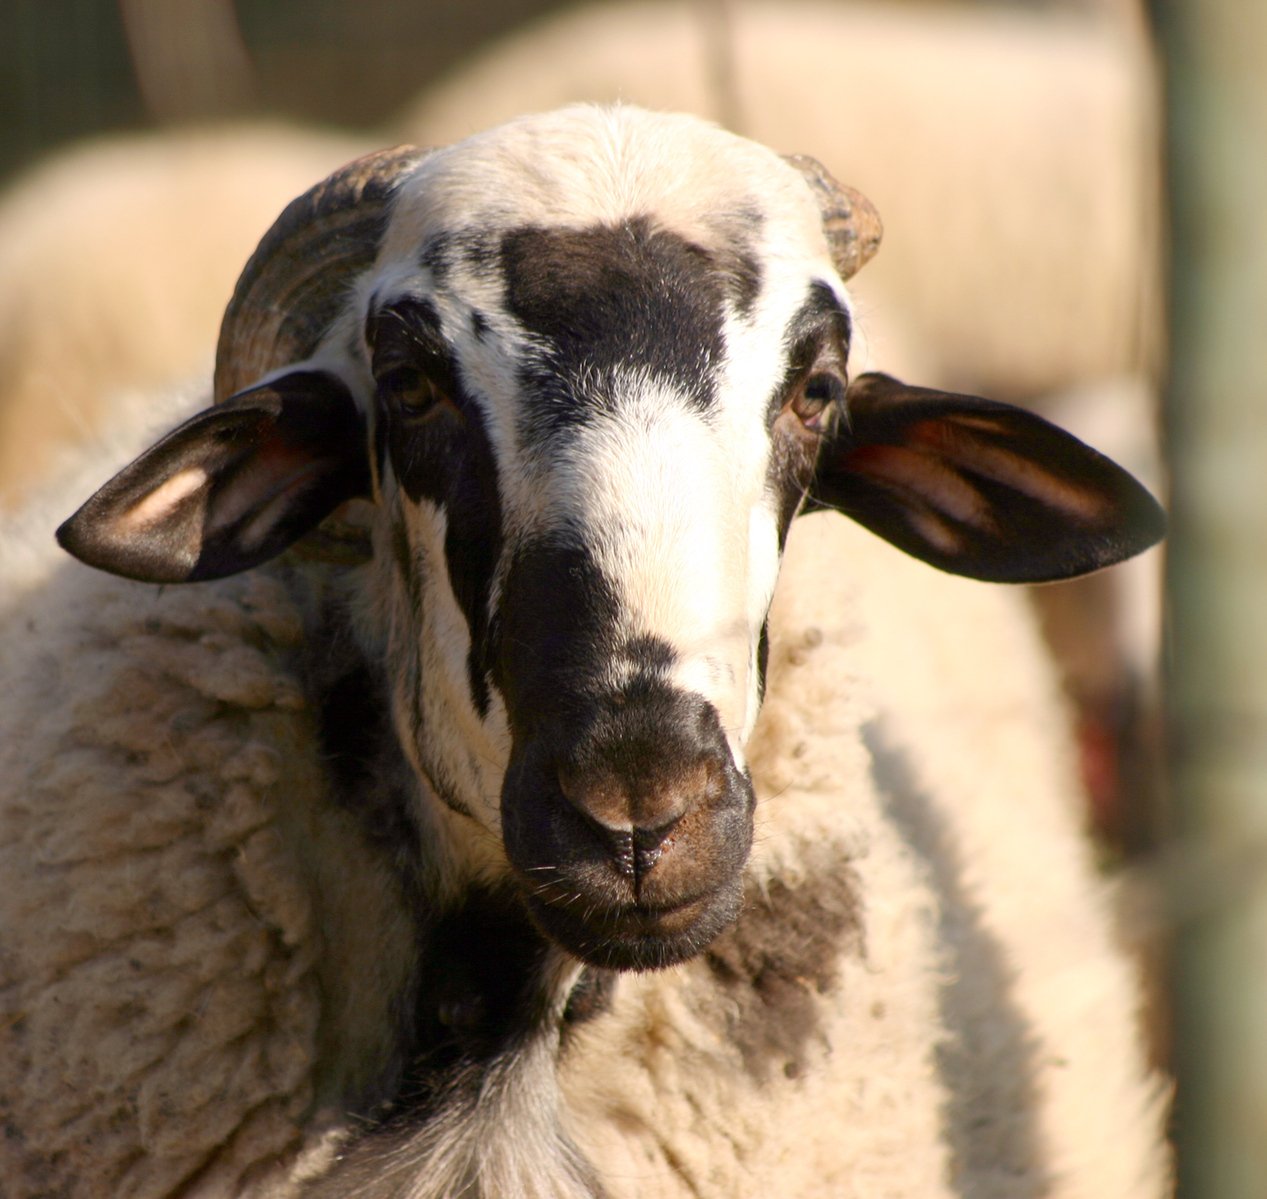 a closeup of the face of a sheep with other sheep in the background